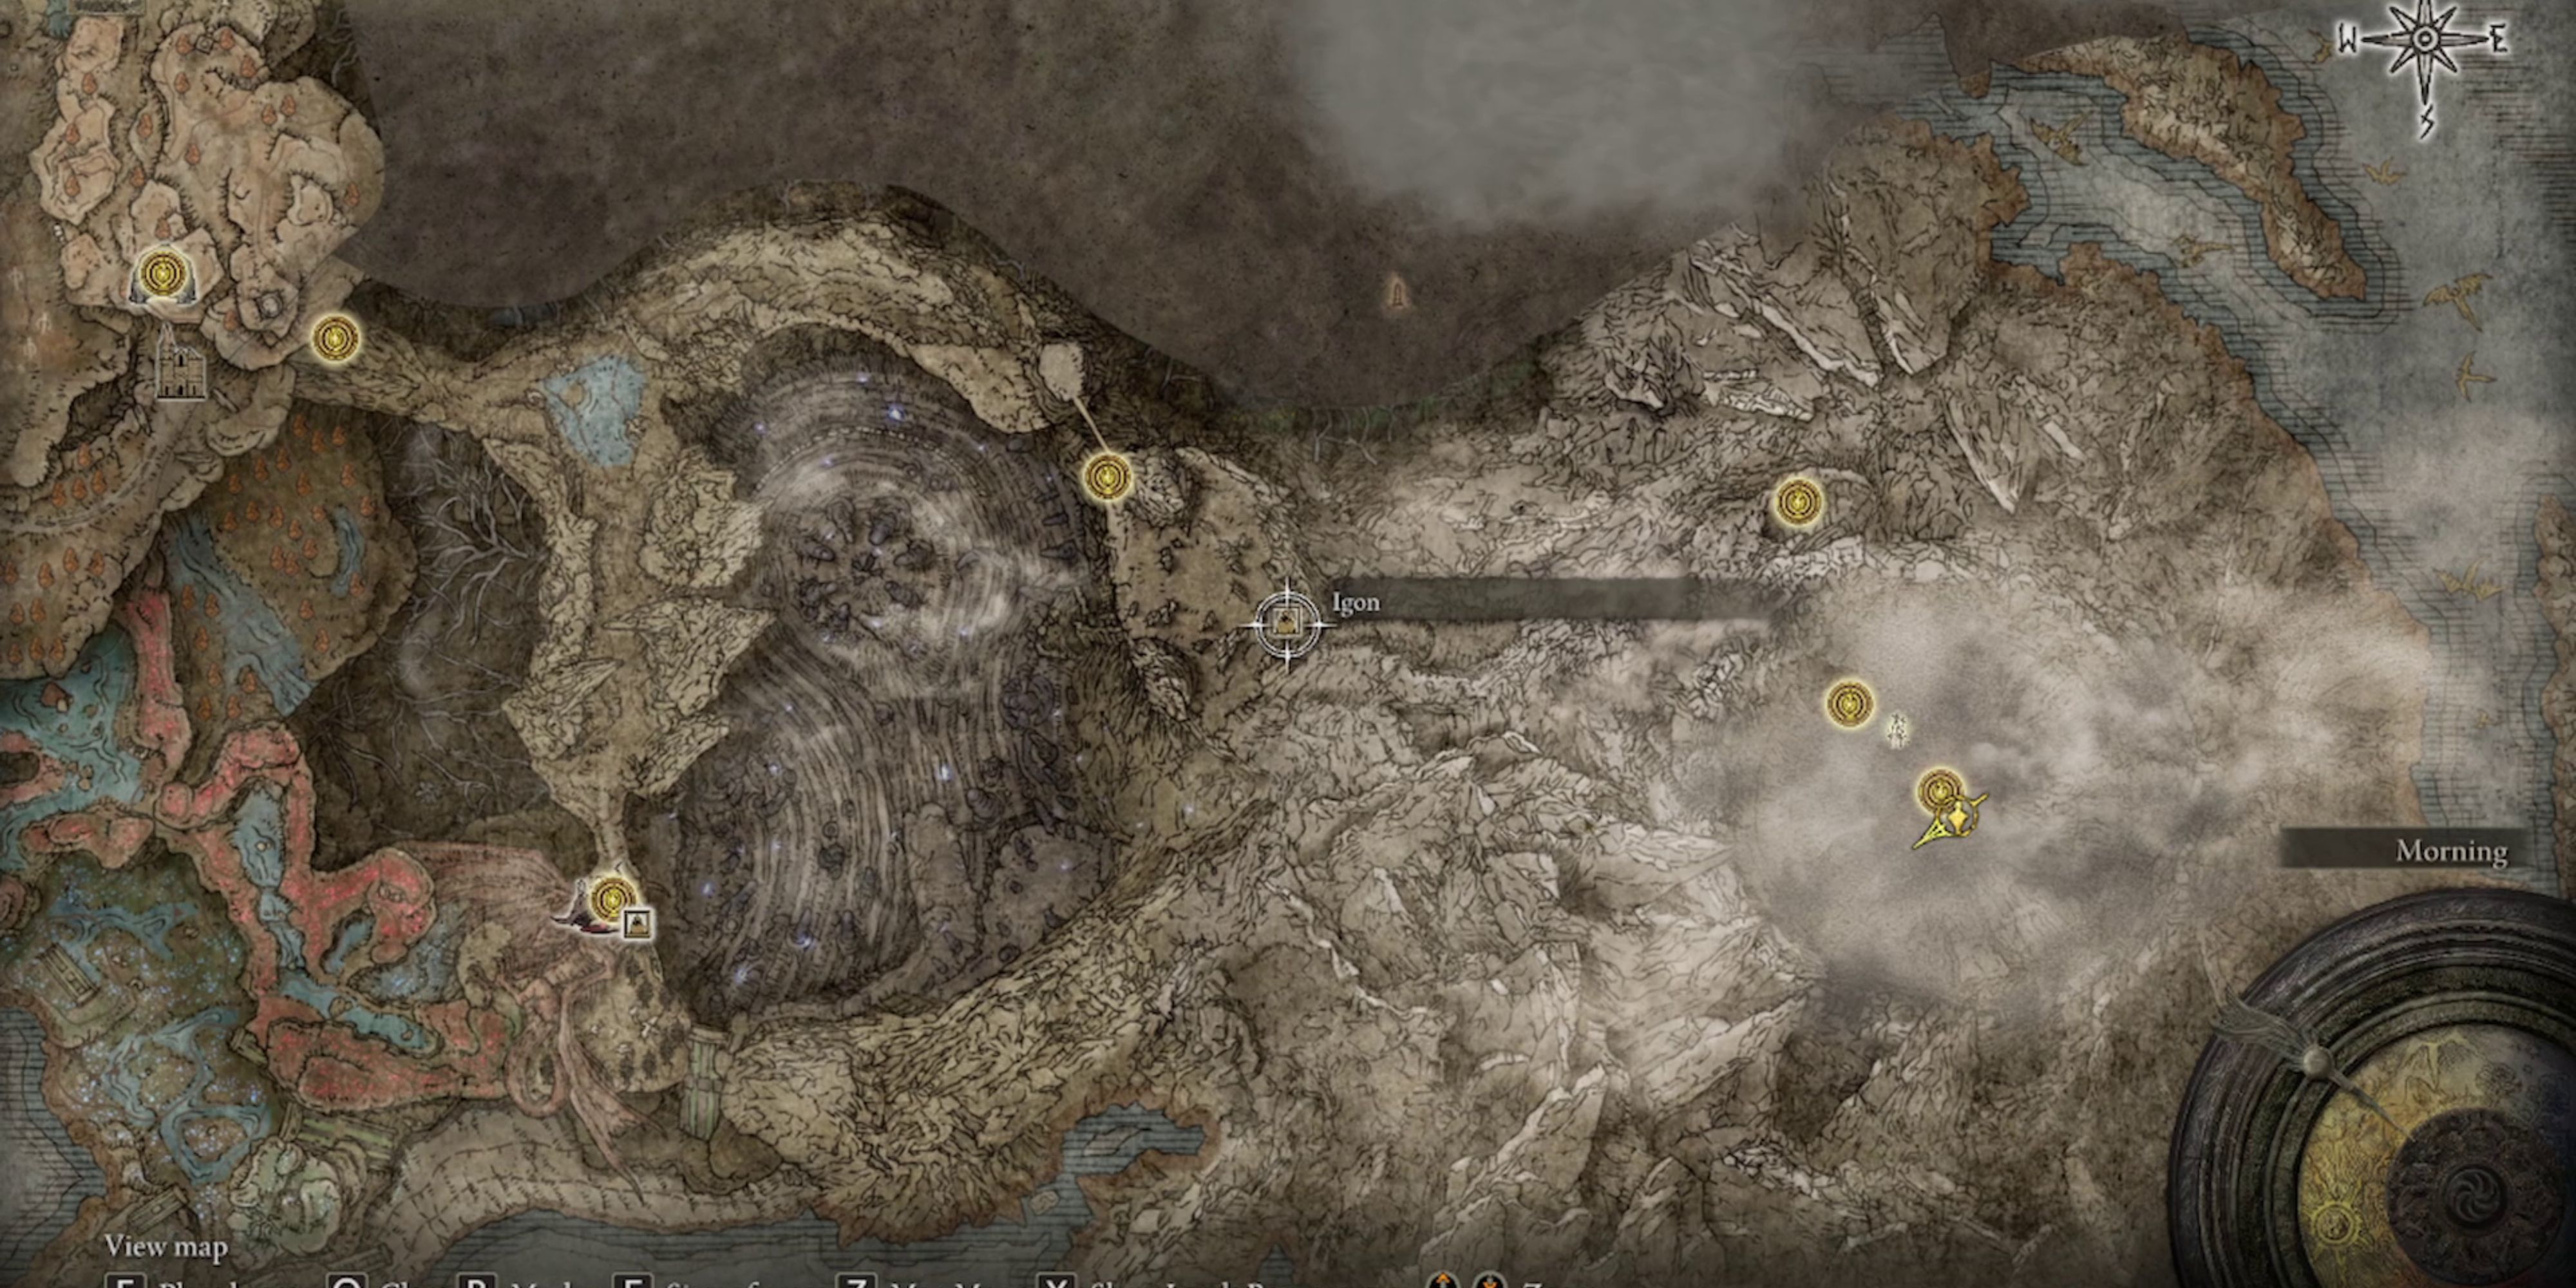 igon's second location shown on the map in elden ring shadow of the erdtree dlc